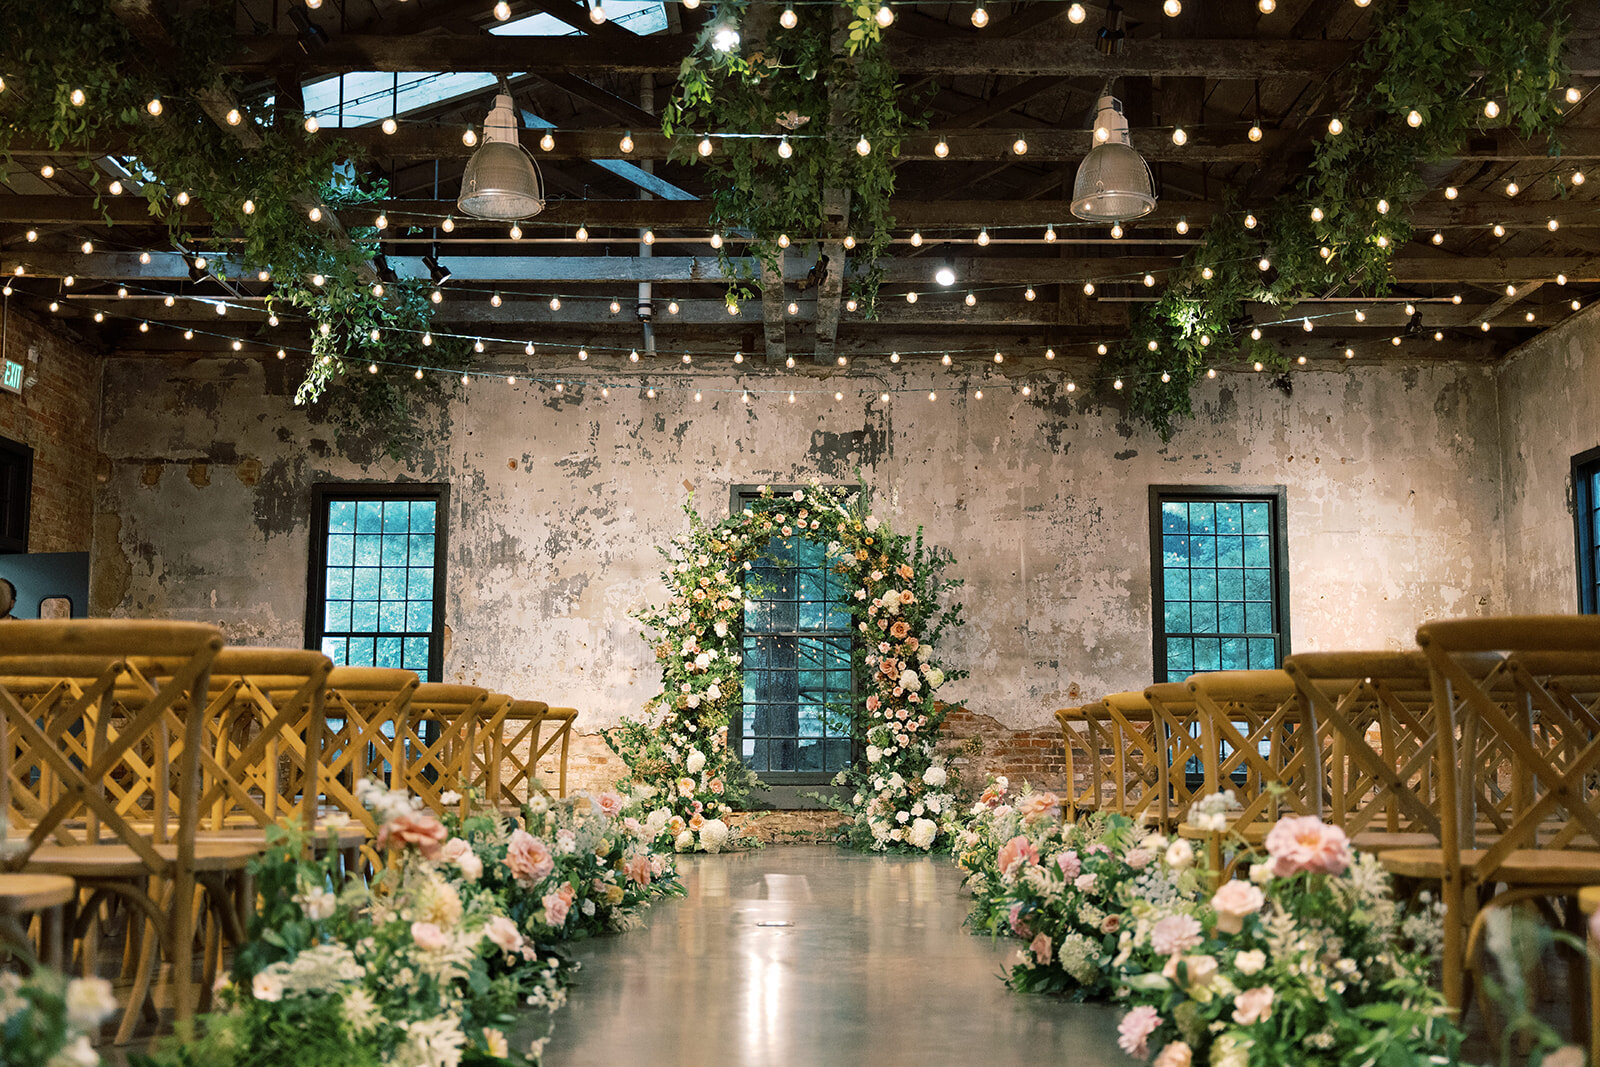 The ceremony inside the Washington mill dye house with a lush full floral arch and a meadow of florals going down the sides of the aisle including white, blush, and peach flowers and greenery hanging from the ceiling.